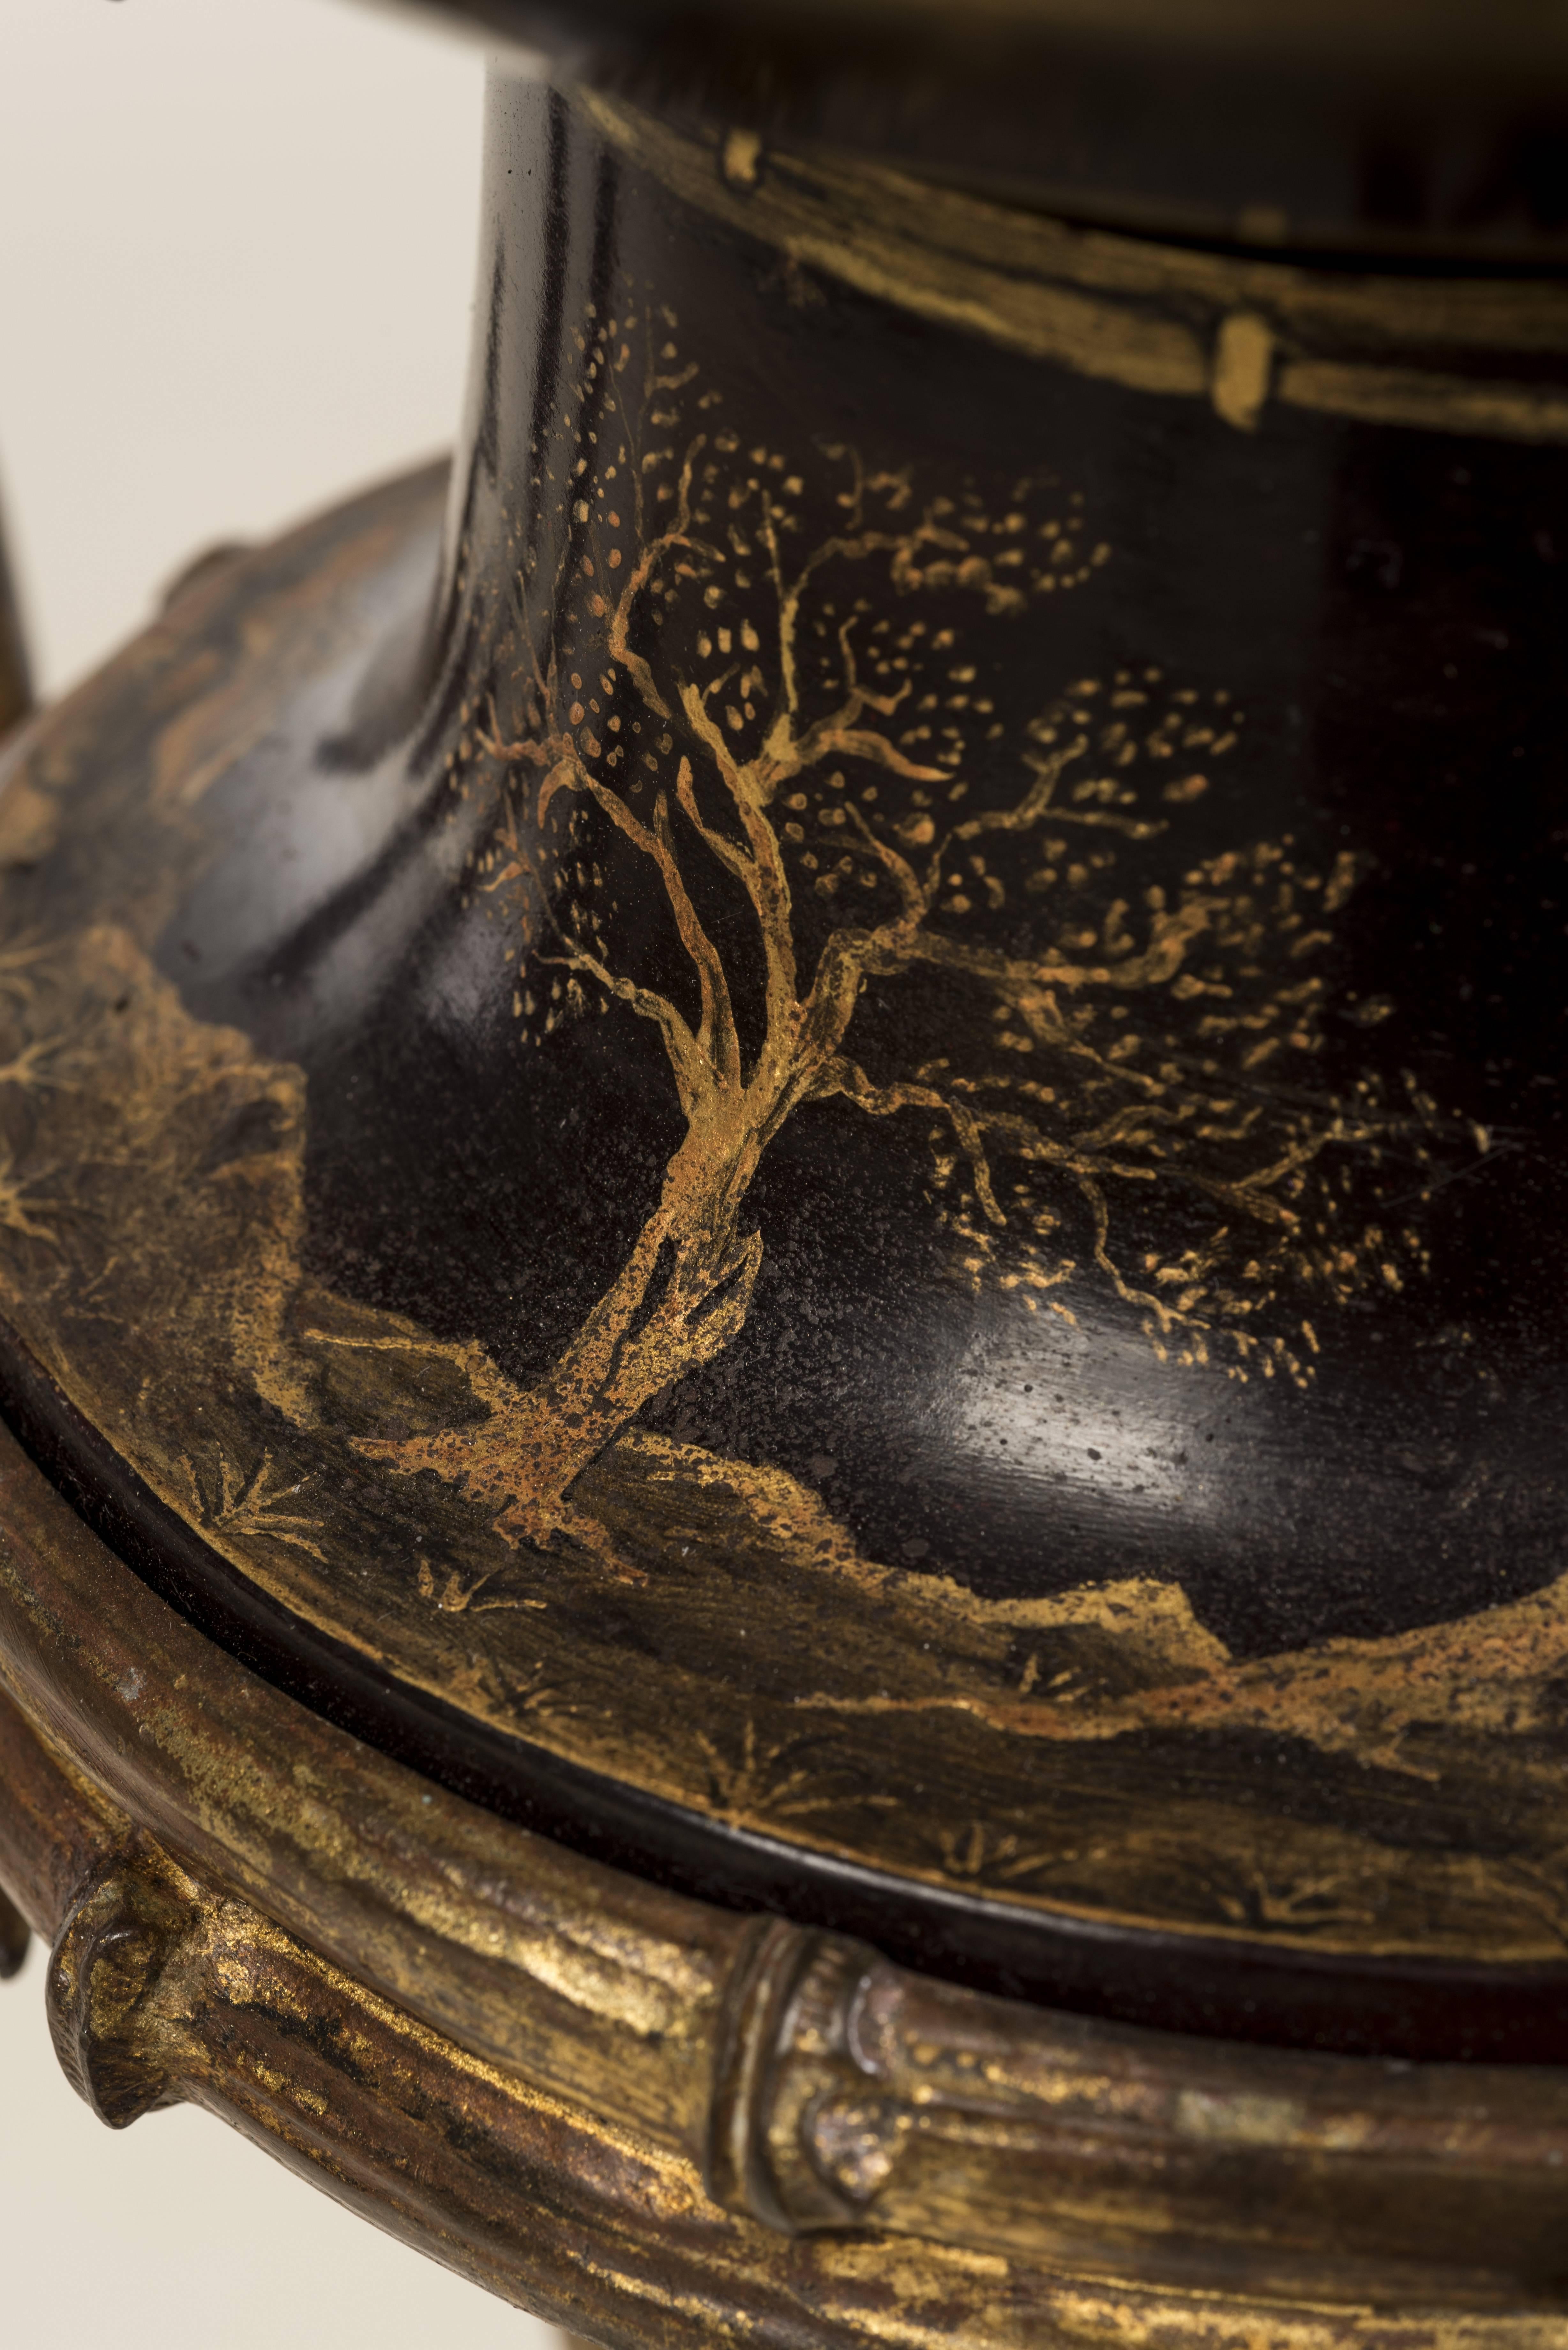 Jardinière Médicis vase shape in copper with gold lacquered decoration on a burgundy background of a Japanese landscape with a volcano and an eagle in the foreground.
Gilt bronze handles in the shape of winged dragons.
Gilded bronze bamboo tripod